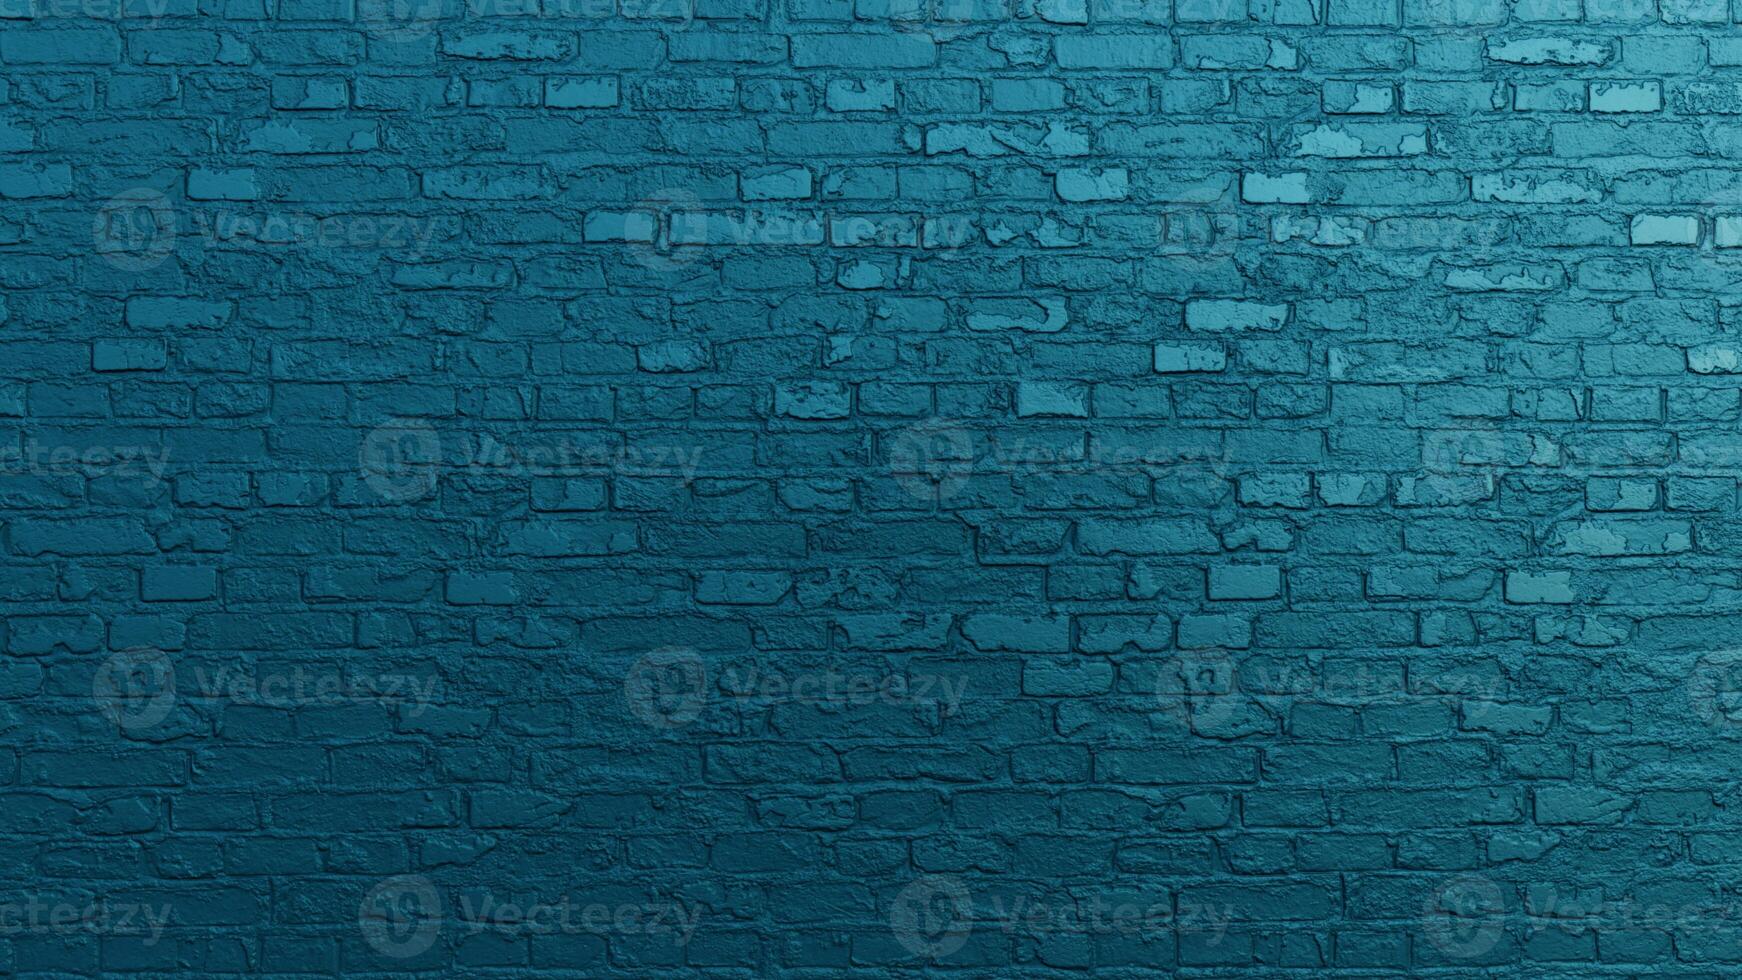 Brick texture blue for background or cover photo